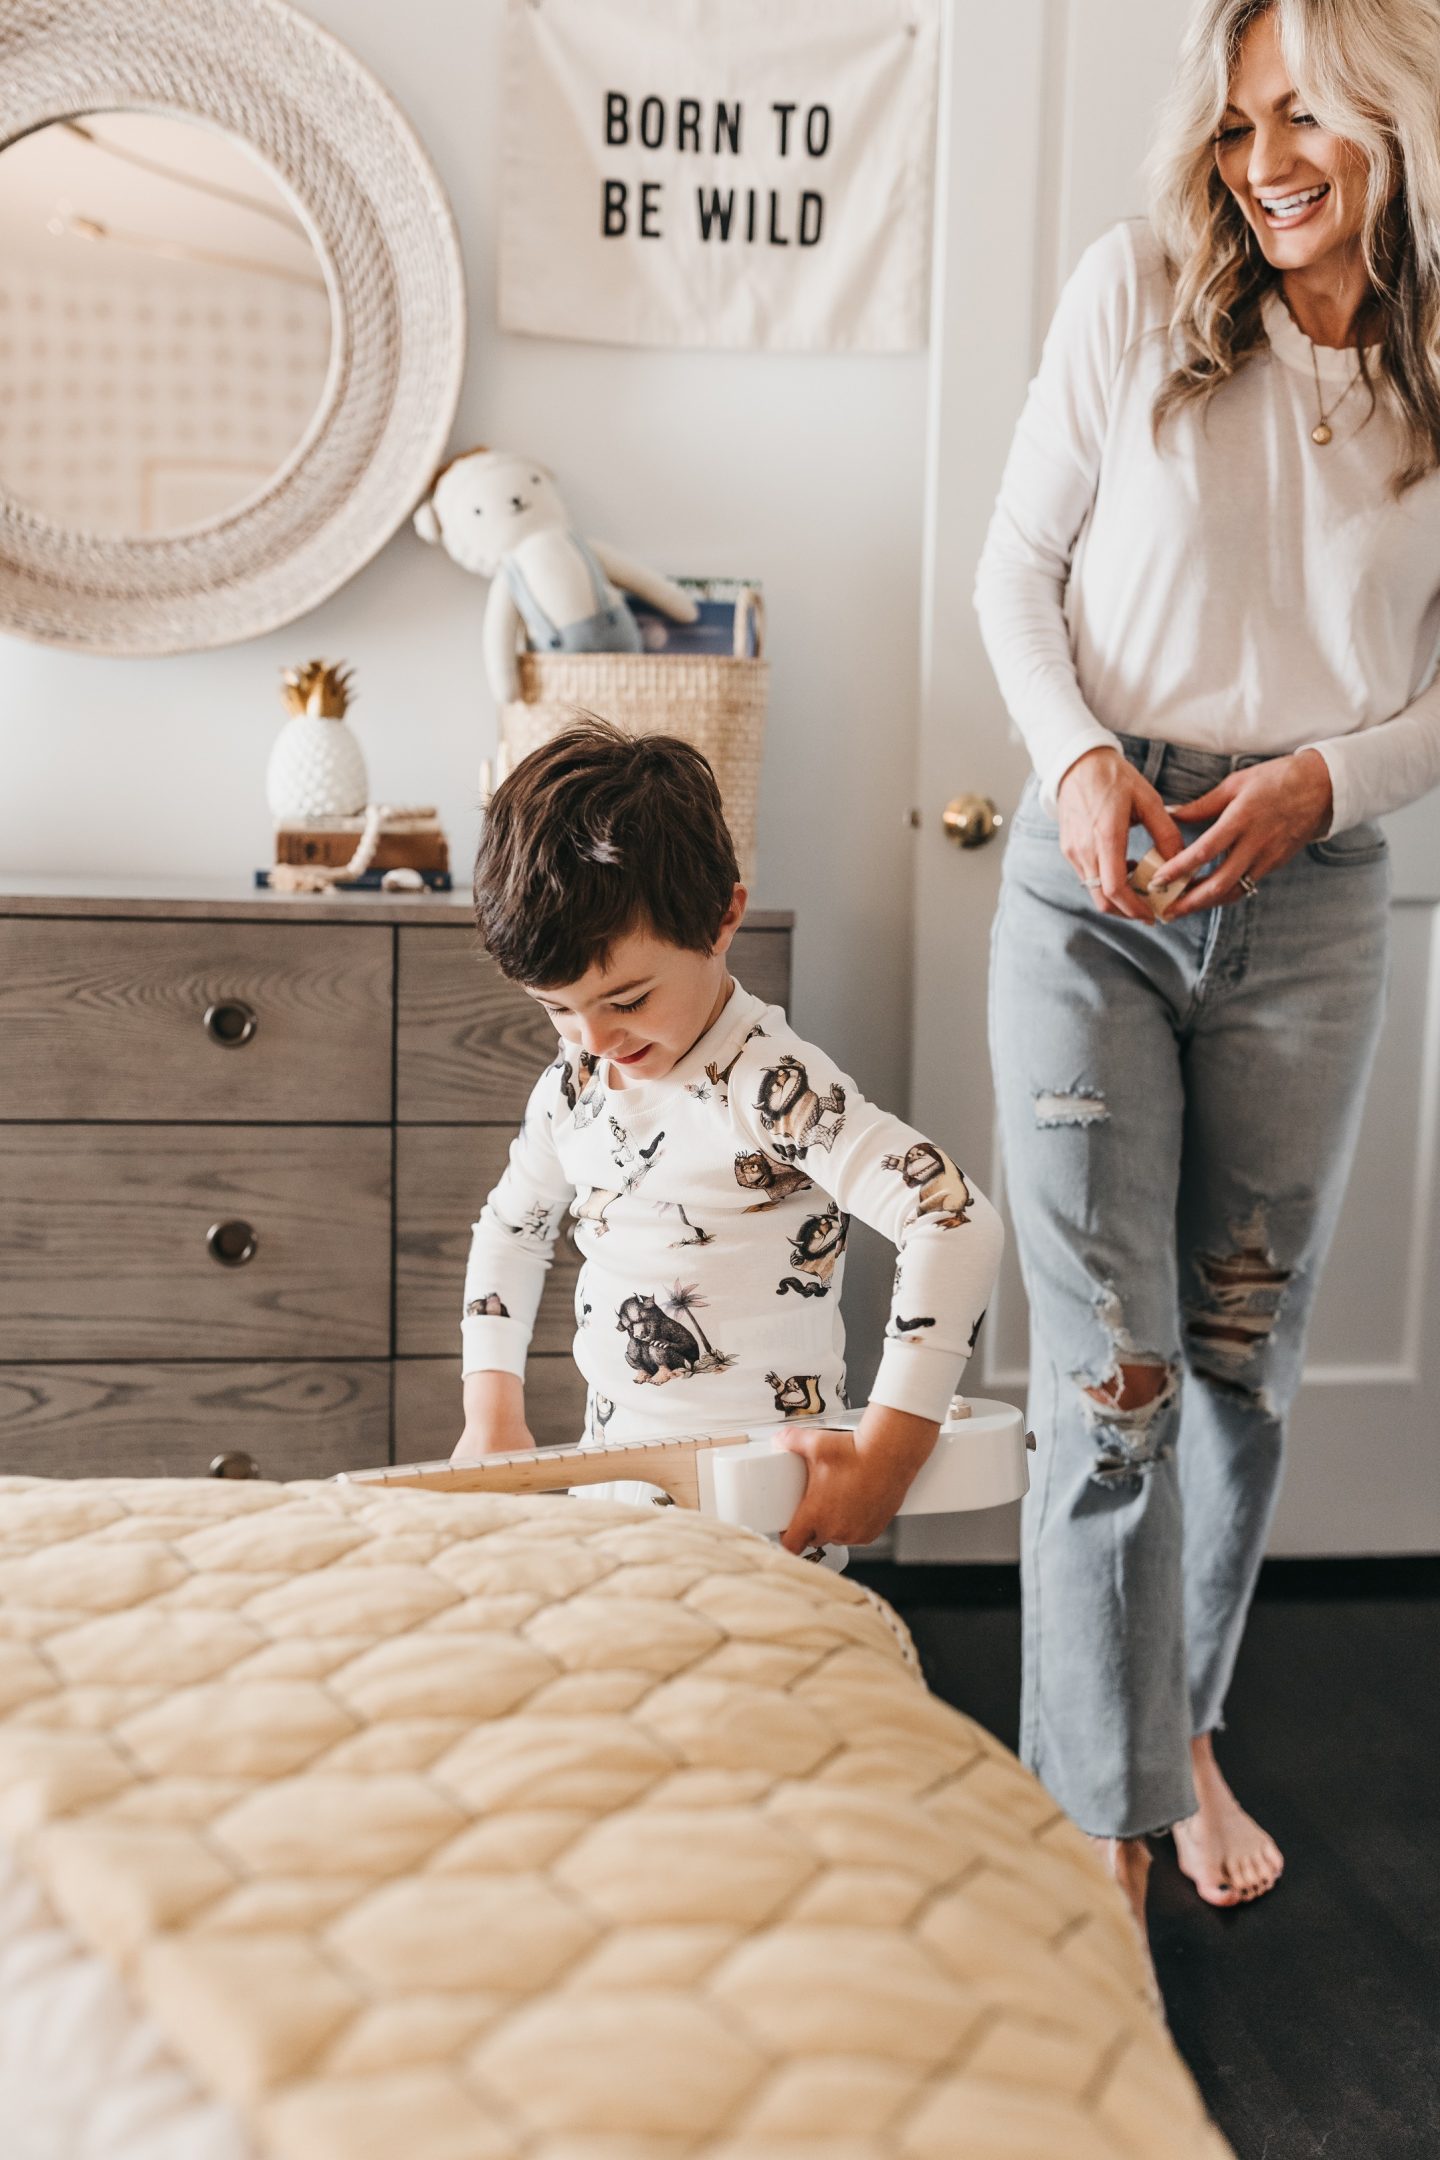 It's Back to School with Pottery Barn Kids - CHAMPAGNE + MACAROONS